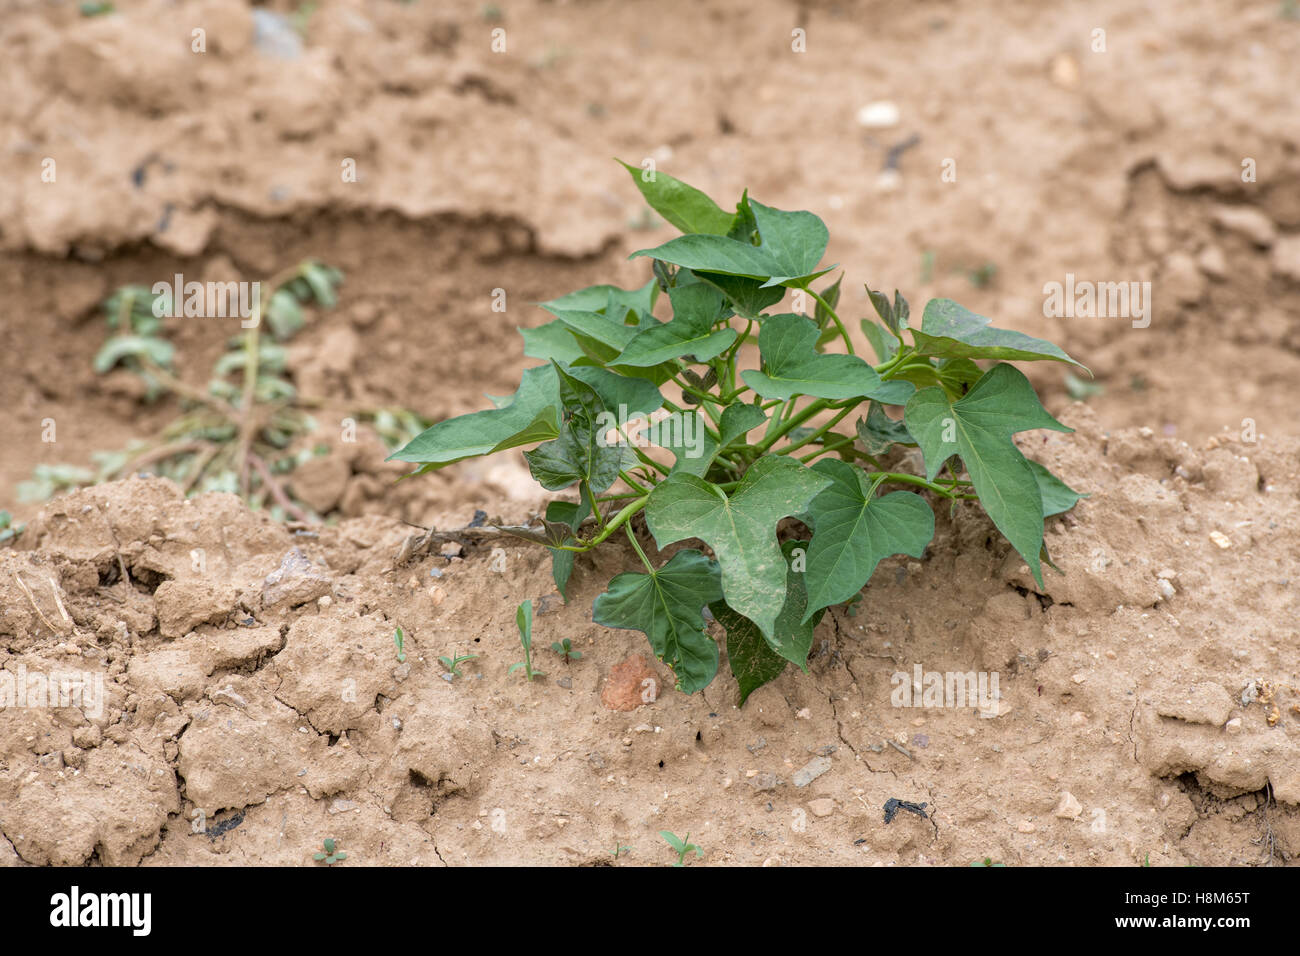 Beijing, China - Young vegetable plant in dry soil on a farm near Beijing, China. Stock Photo